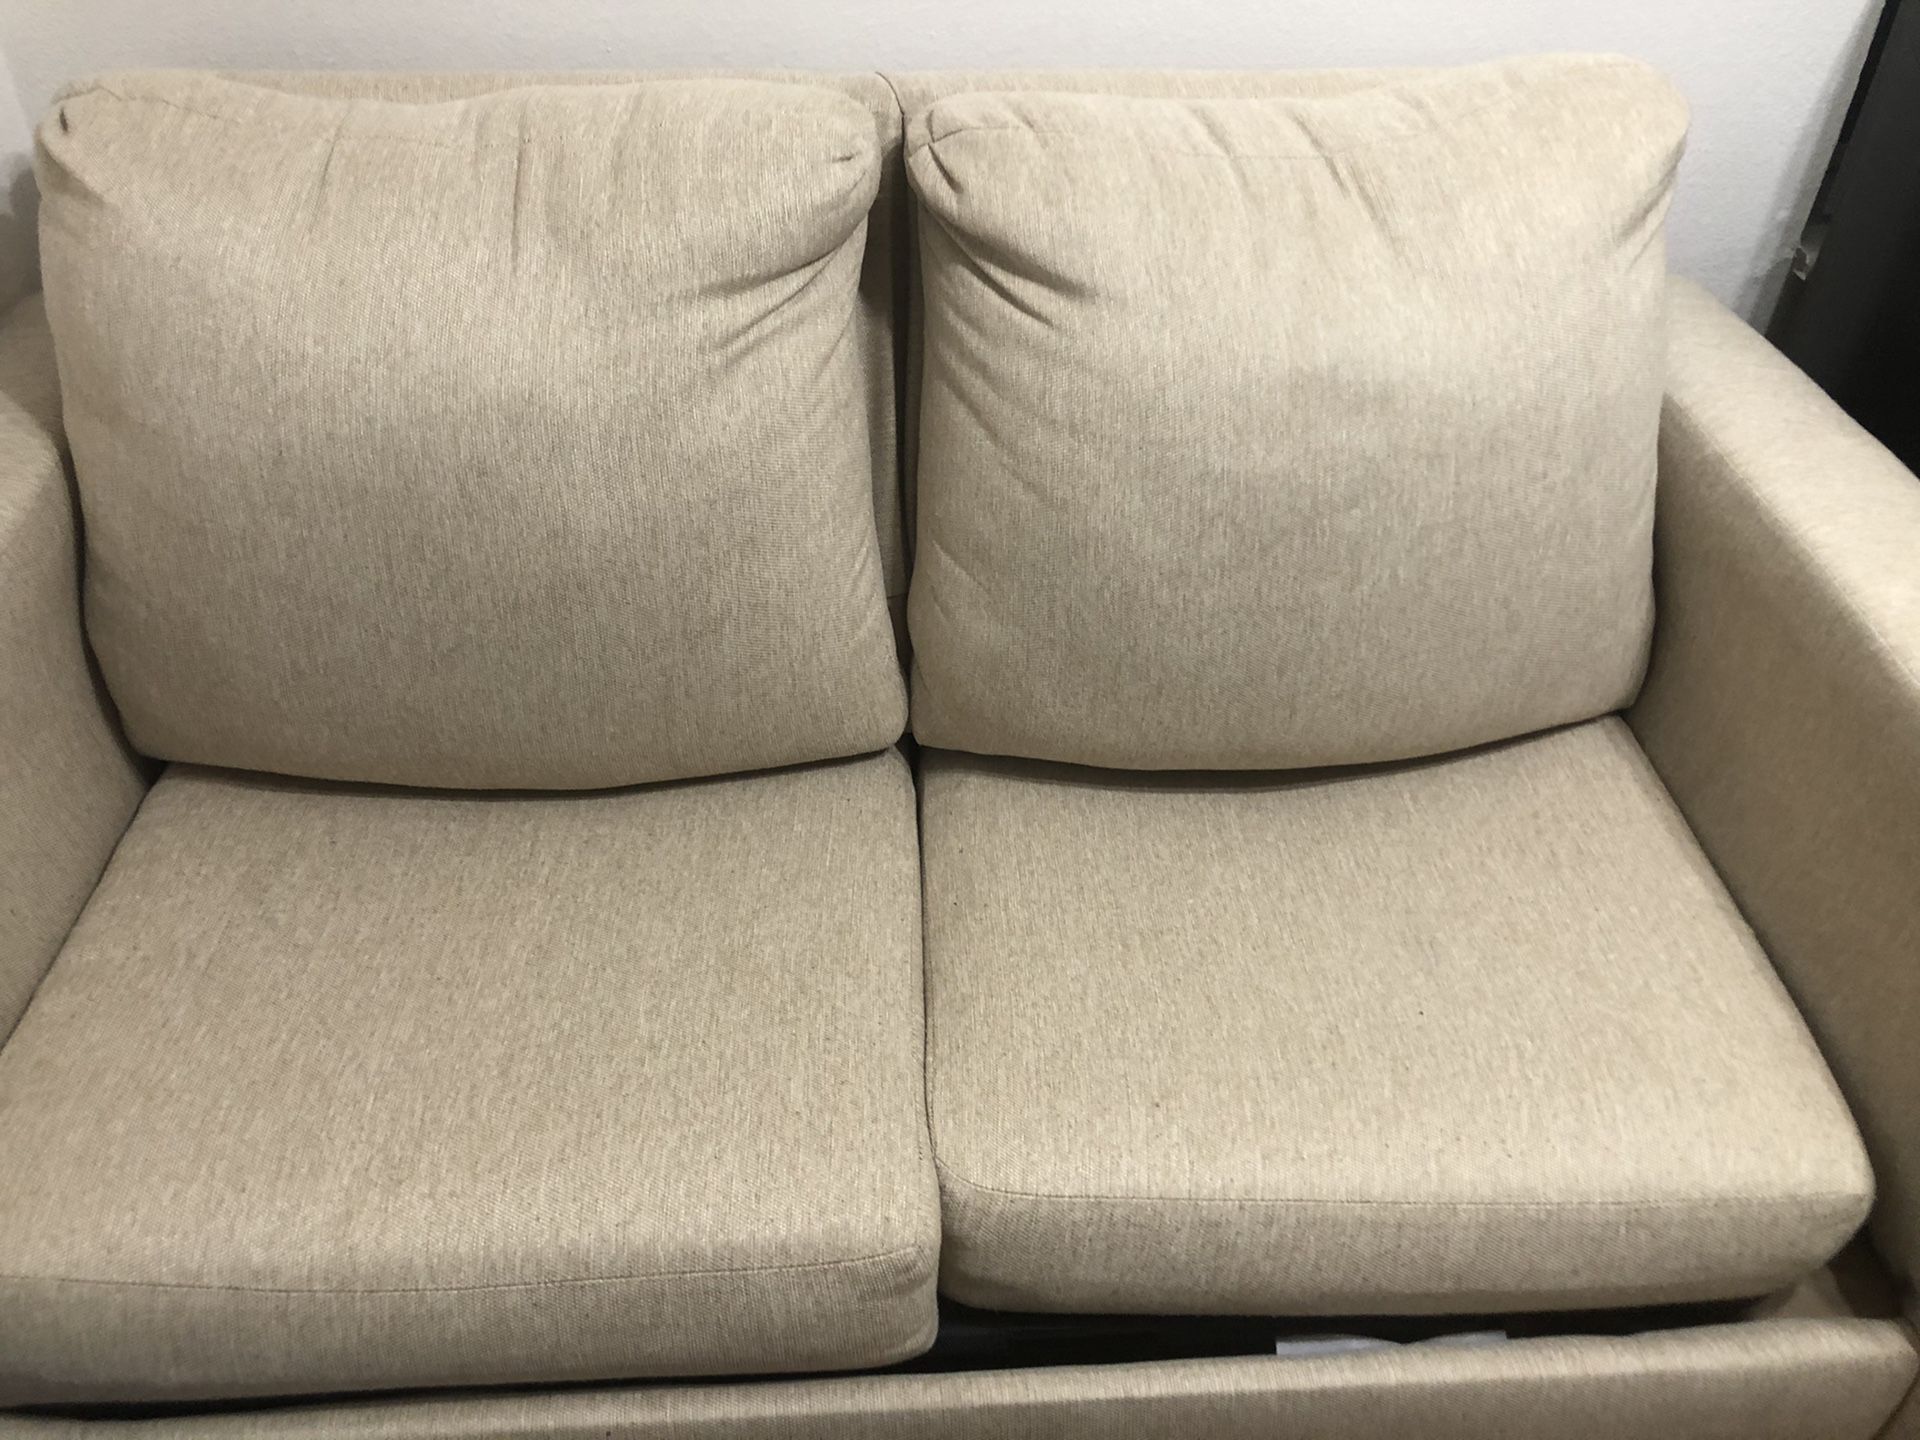 Love seat- hide away bed twin size- in great condition no rips- has been cared for well, very comfortable.